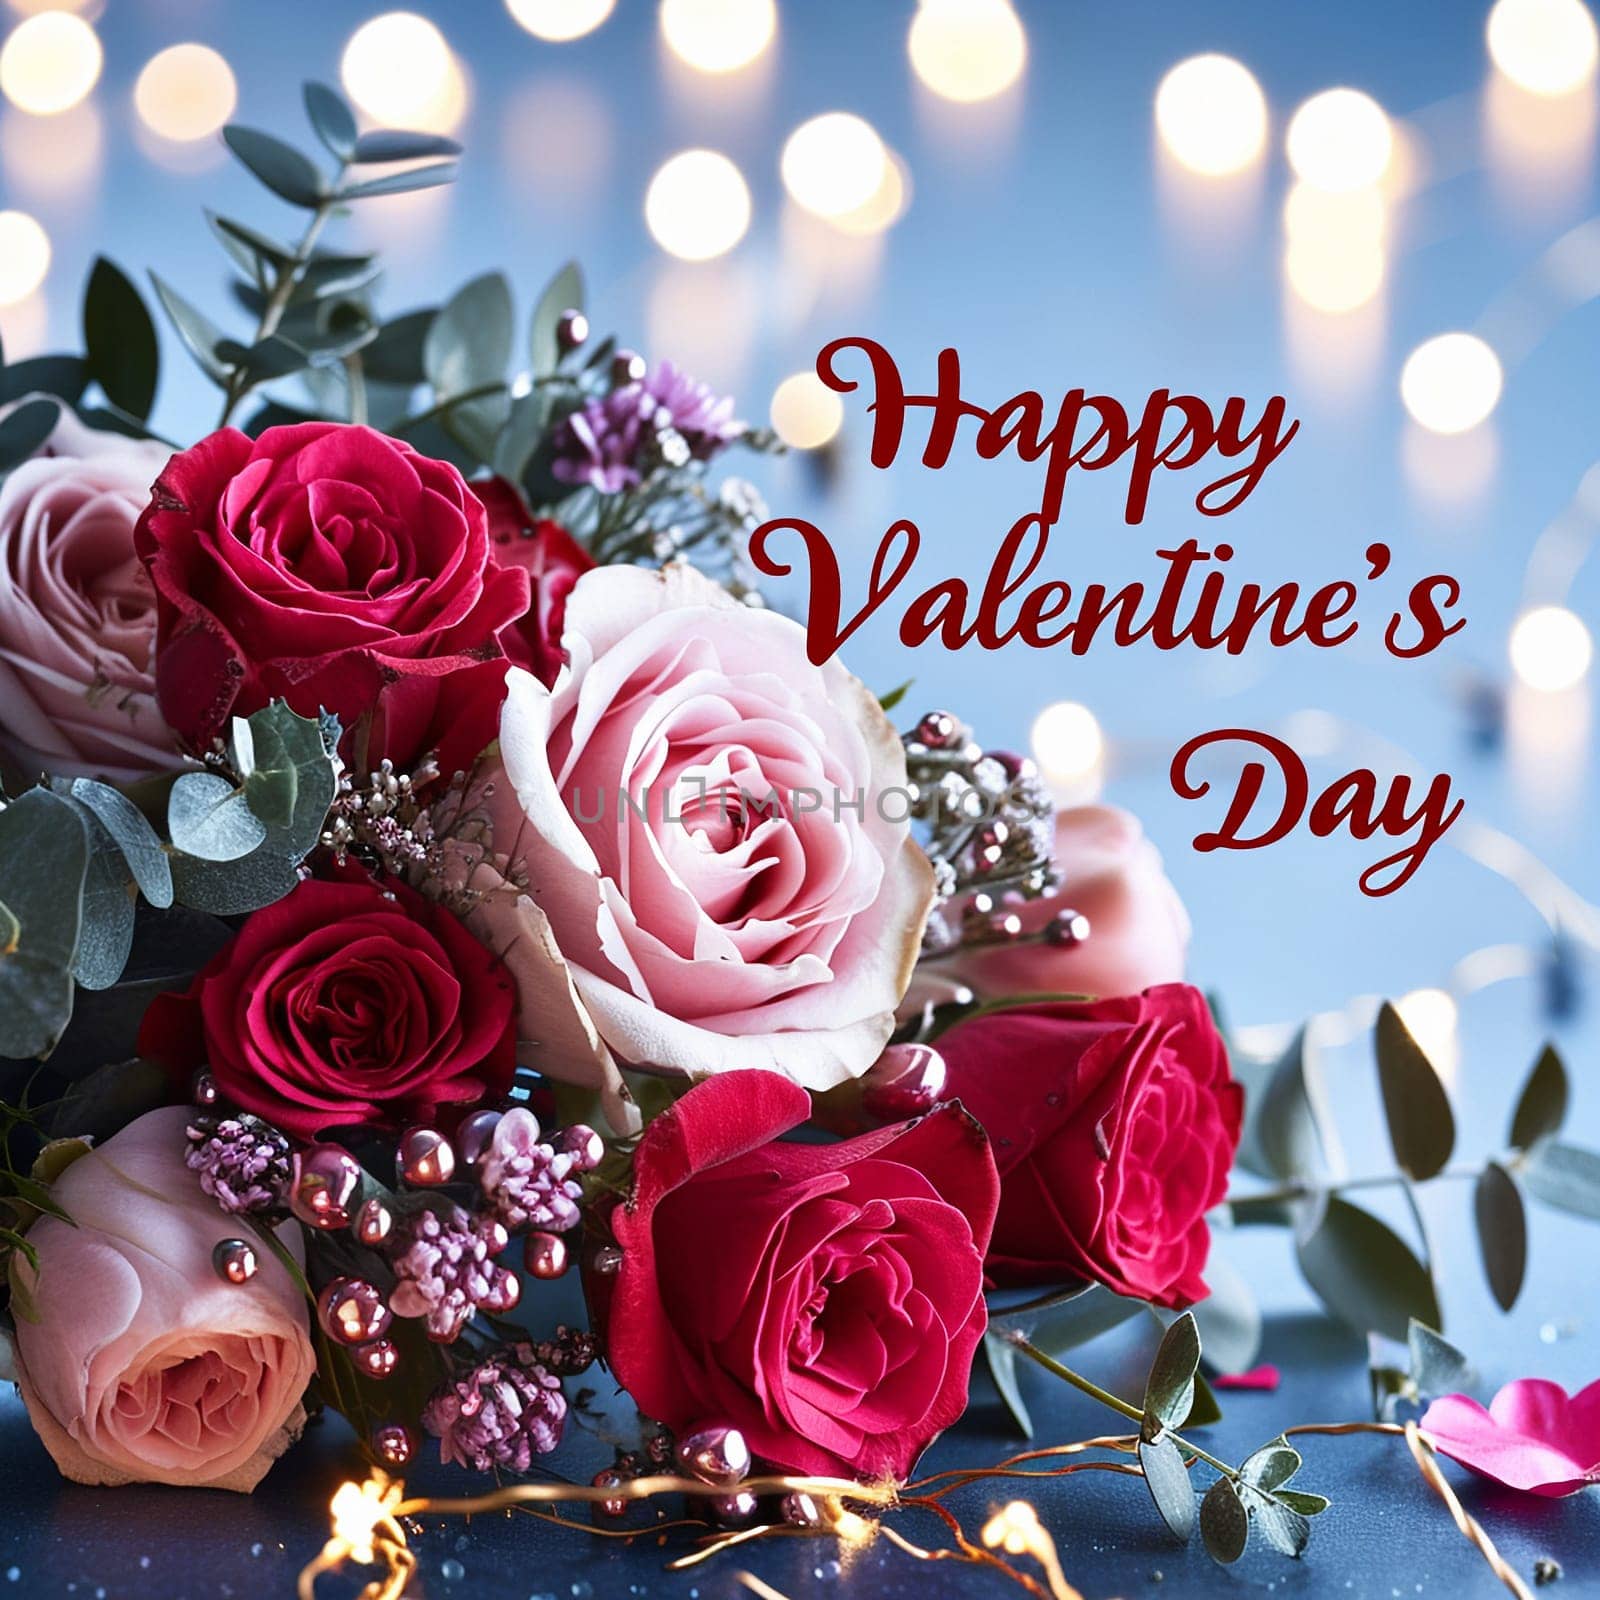 A wonderful festive background for Valentines day. High quality photo